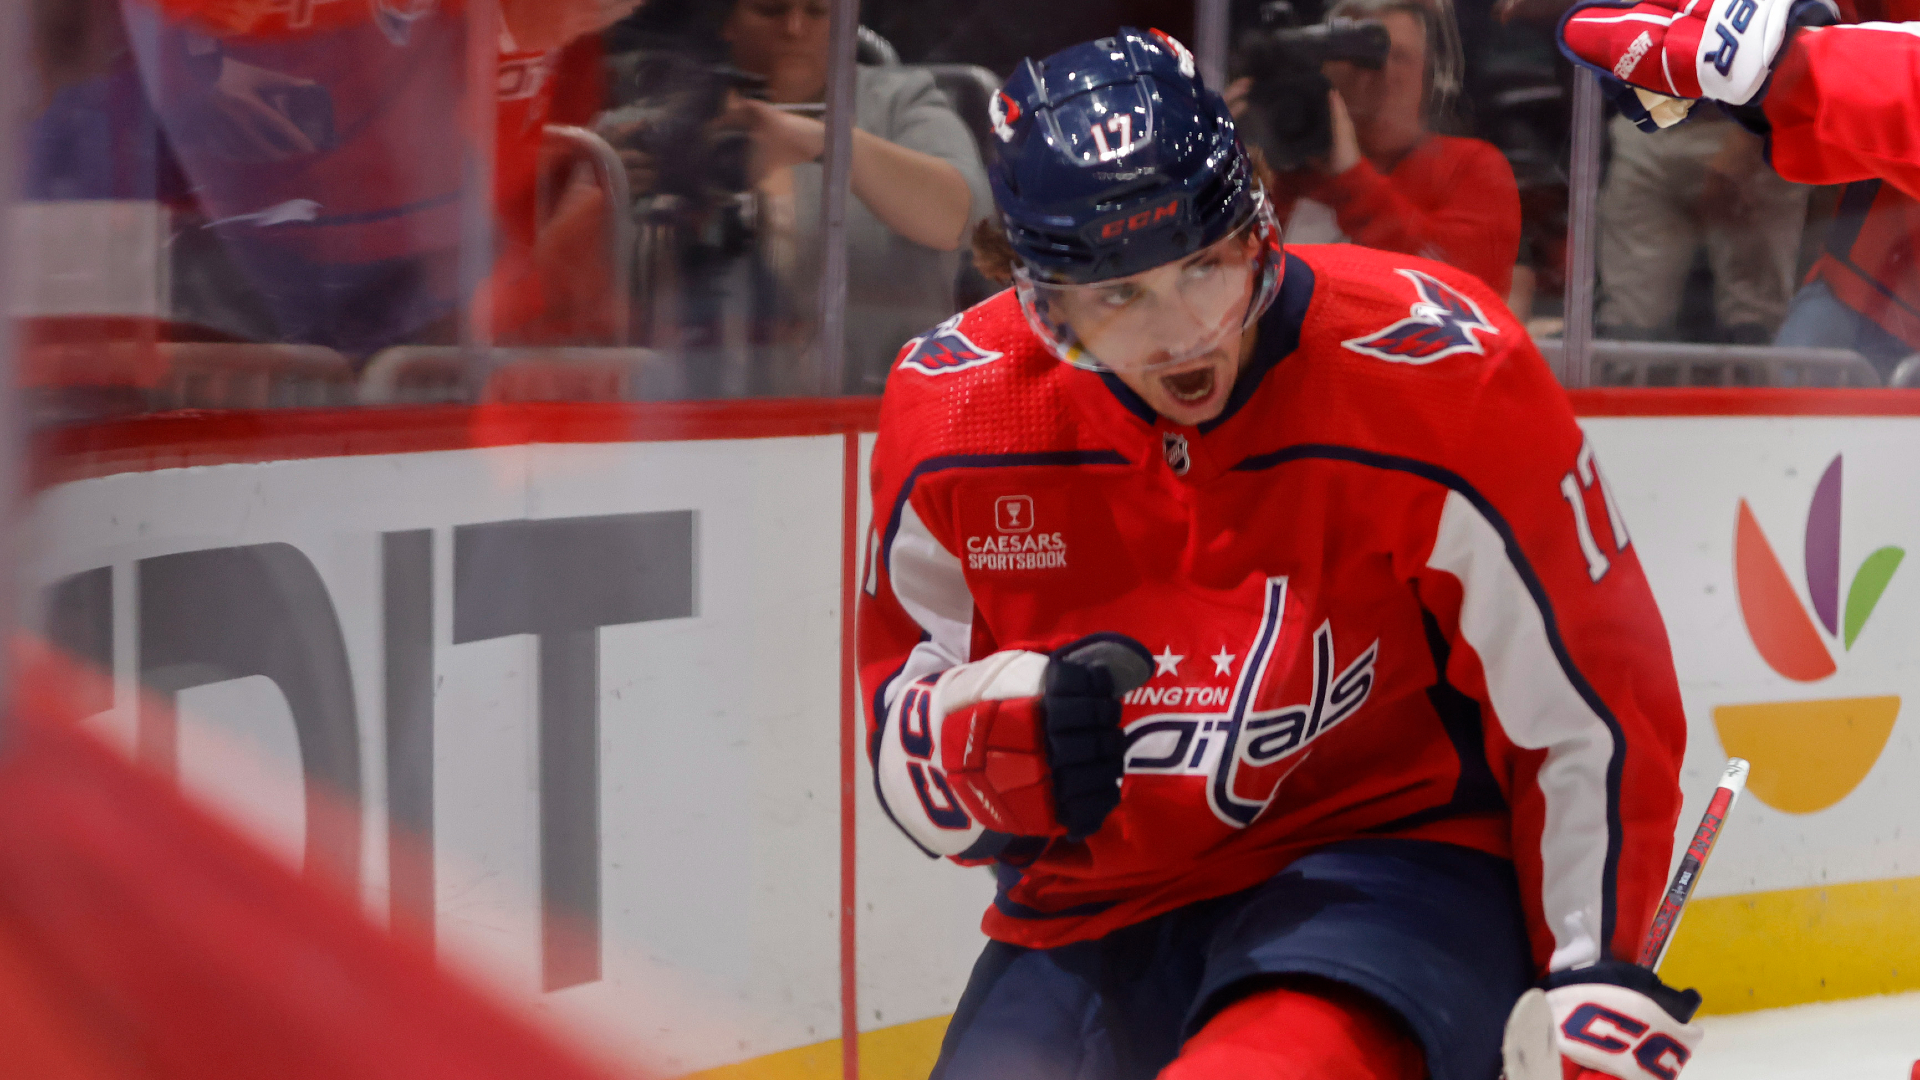 Capitals center Dylan Strome celebrates after scoring a goal against the Oilers